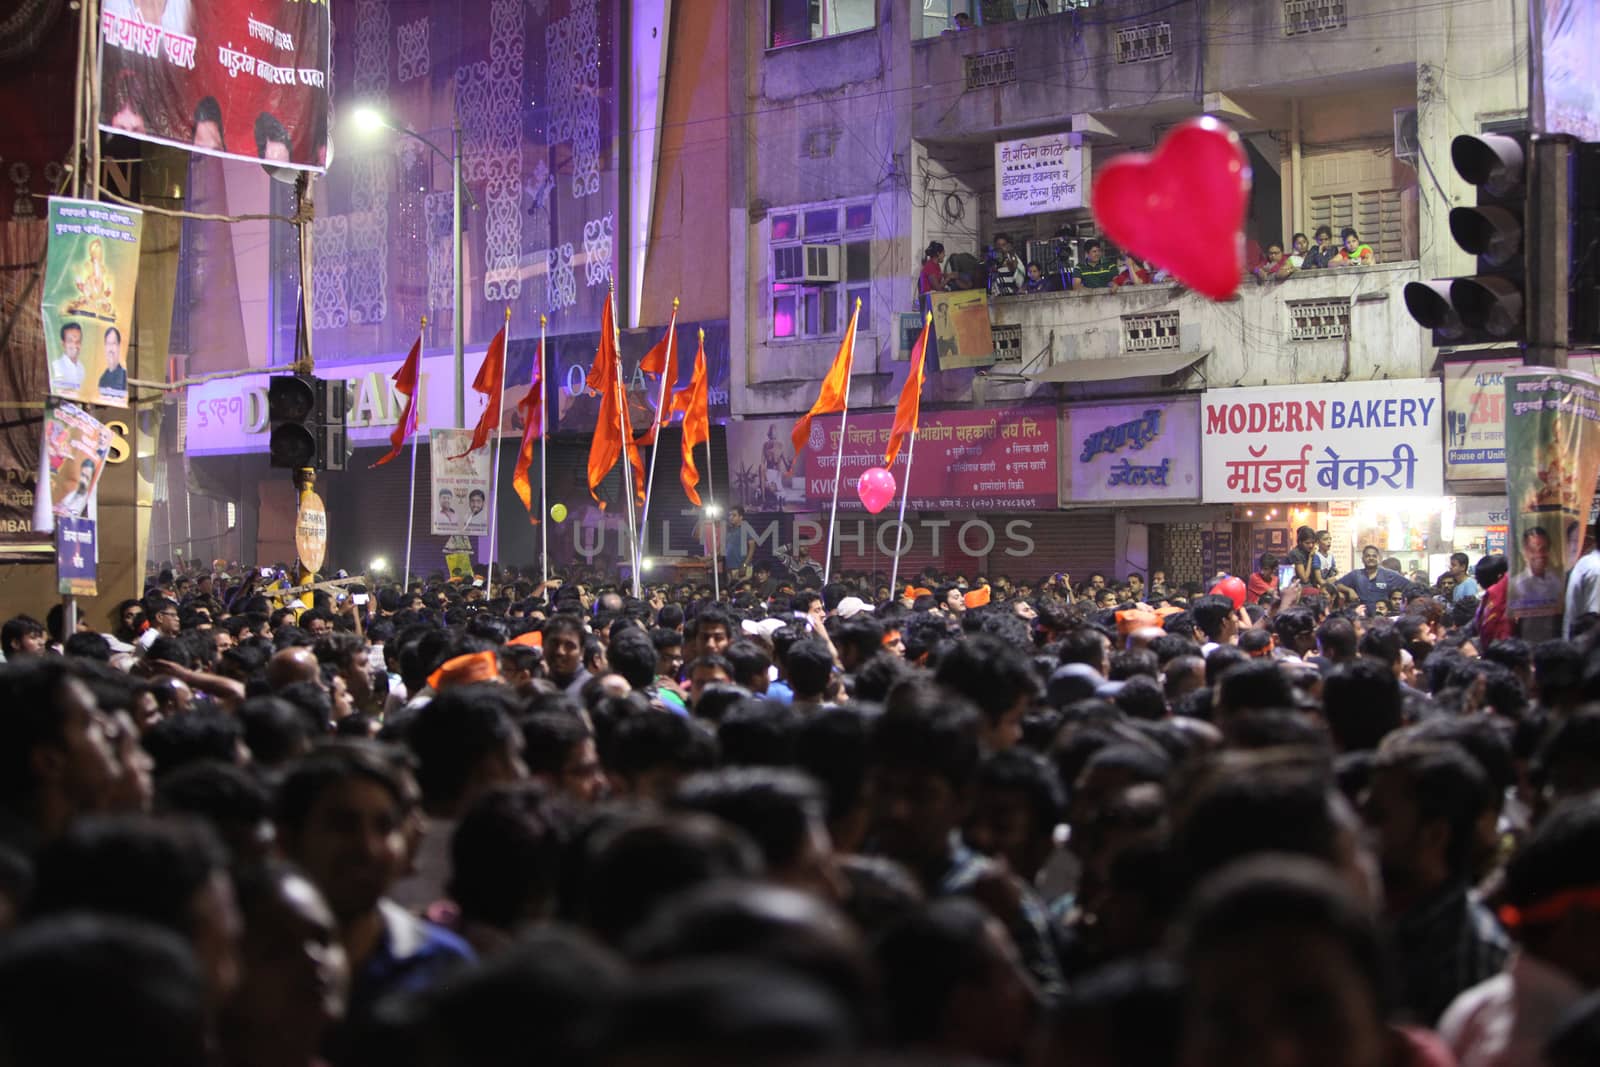 Pune, India - September 28, 2015: Crowds at one of the square during Ganapati festival in India.